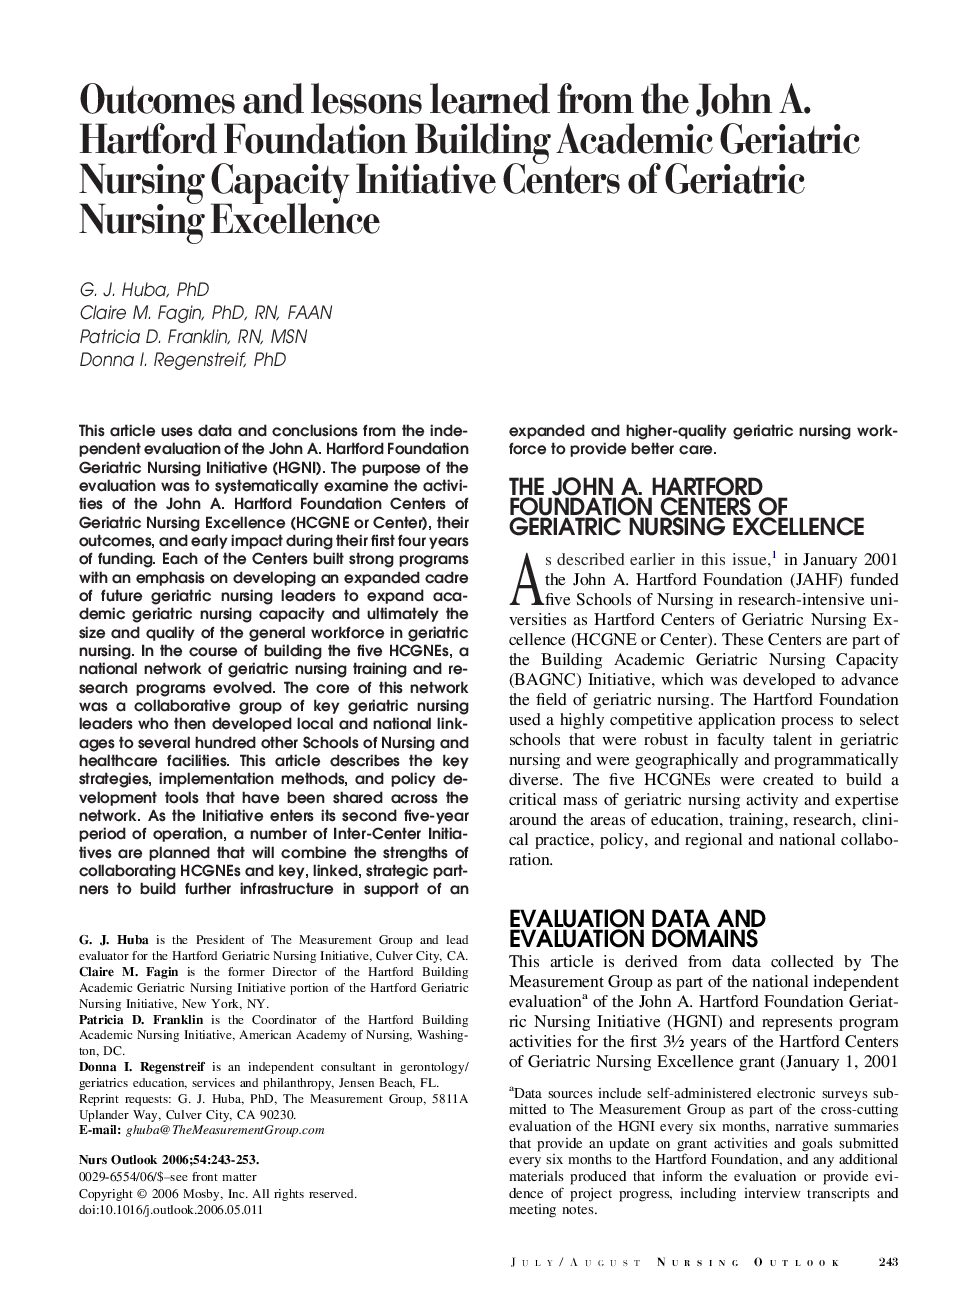 Outcomes and lessons learned from the John A. Hartford Foundation Building Academic Geriatric Nursing Capacity Initiative Centers of Geriatric Nursing Excellence